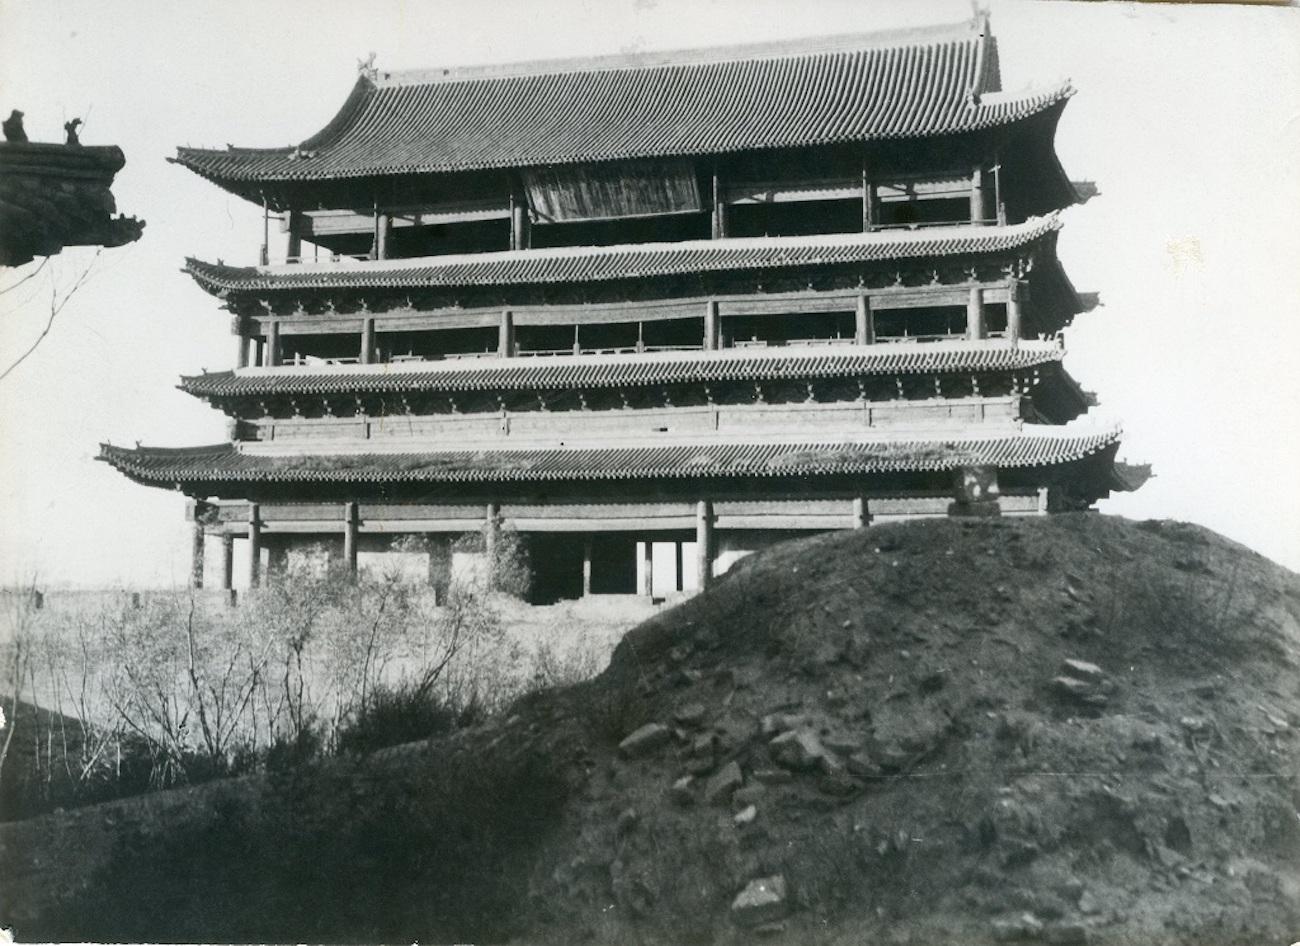 Unknown Landscape Photograph - View on the City of Taiyuan - Vintage Photo 1938